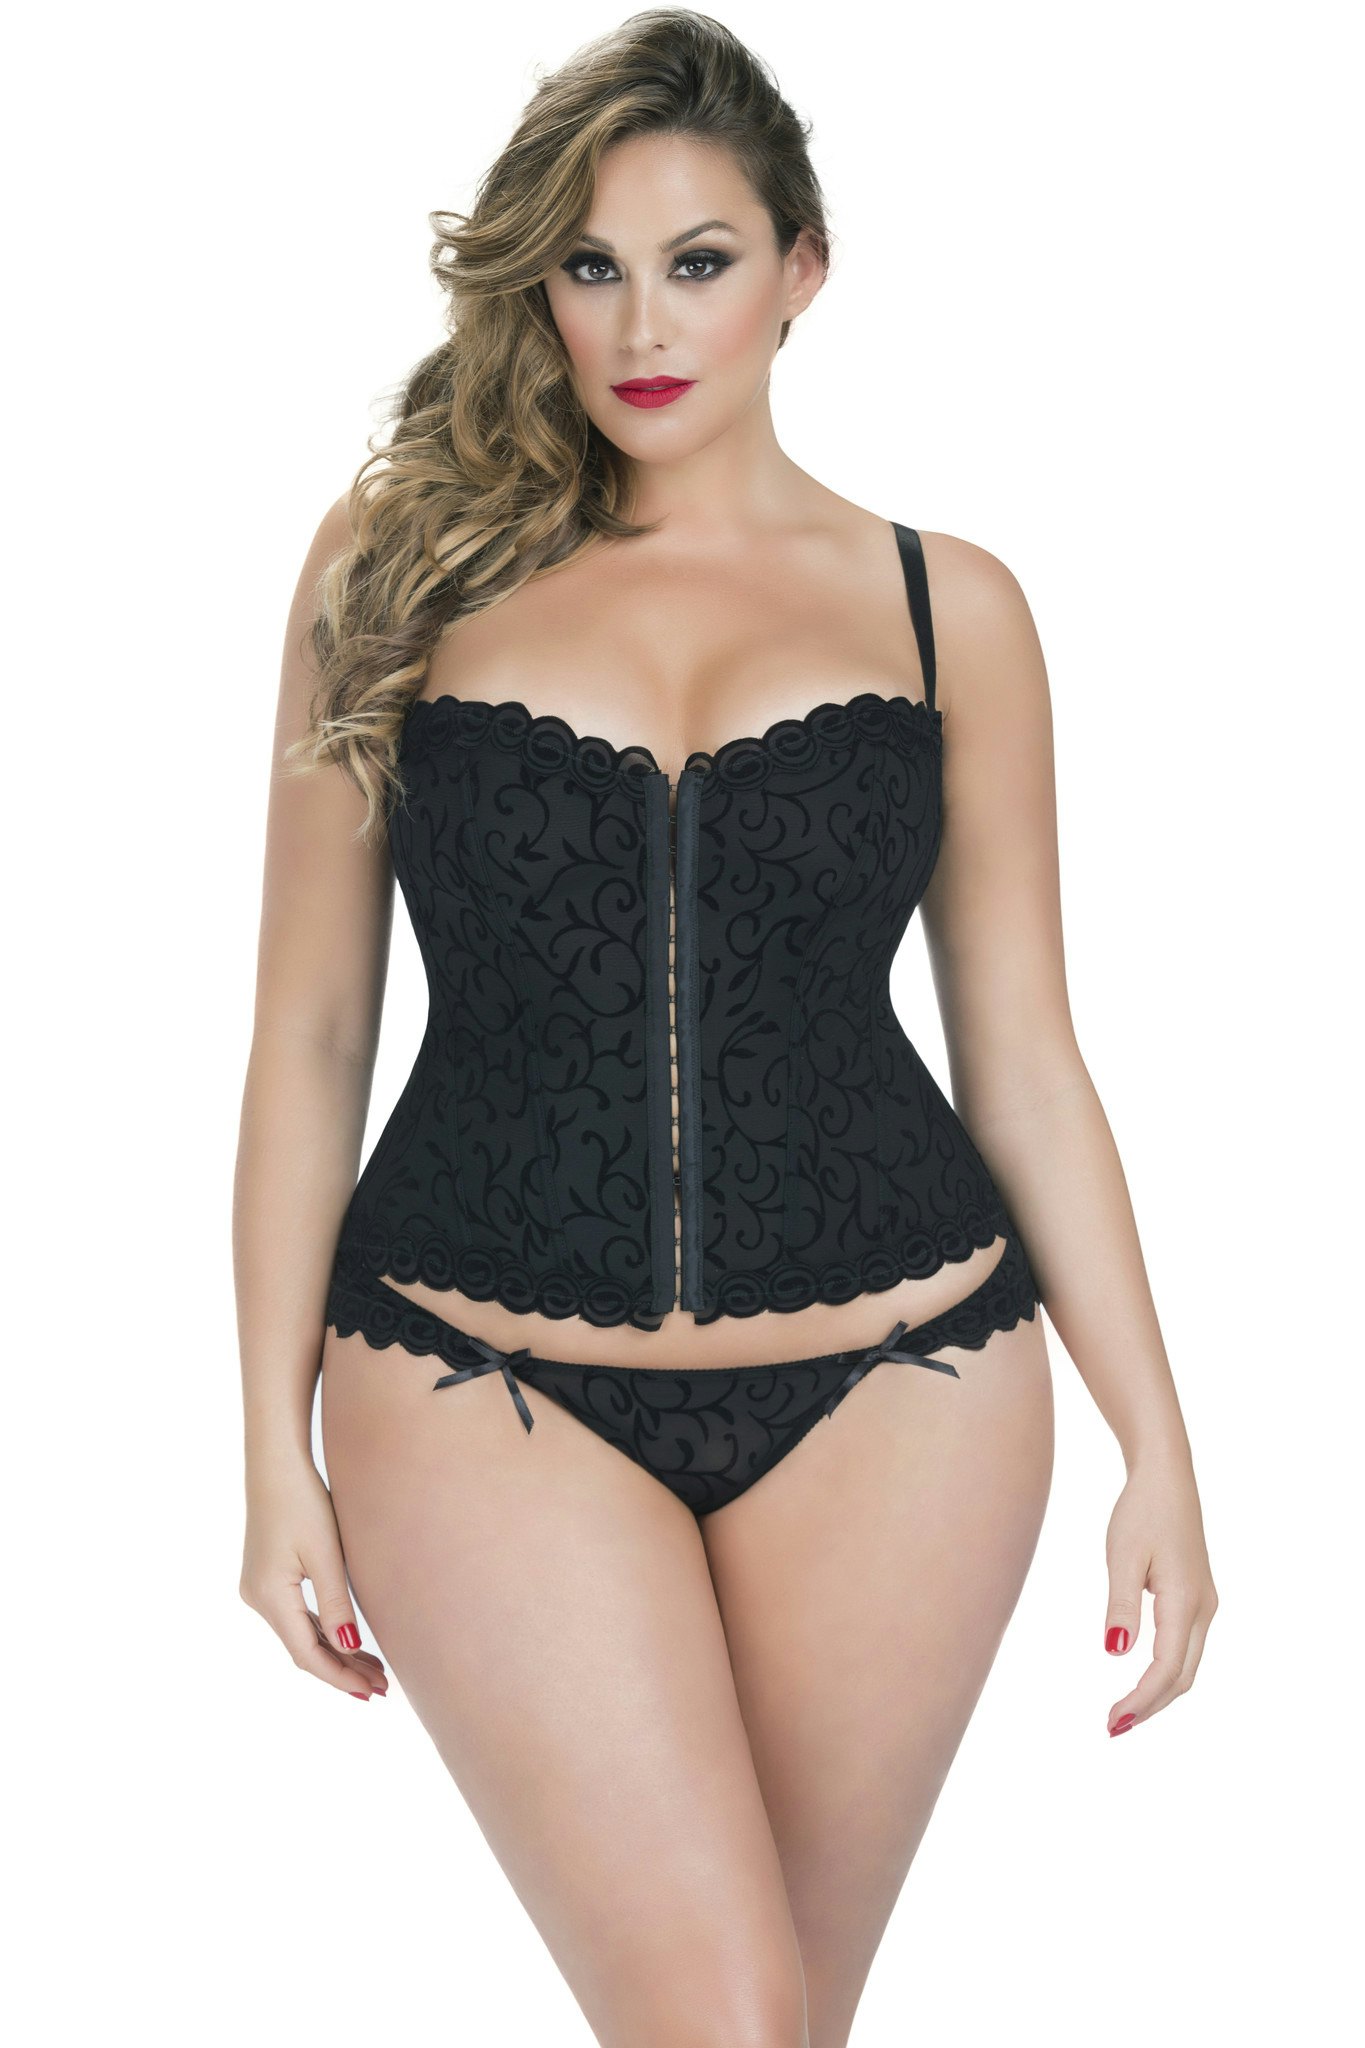 Sexy Plus Size Costumes Womens Plus Size Costumes Cheap Plus